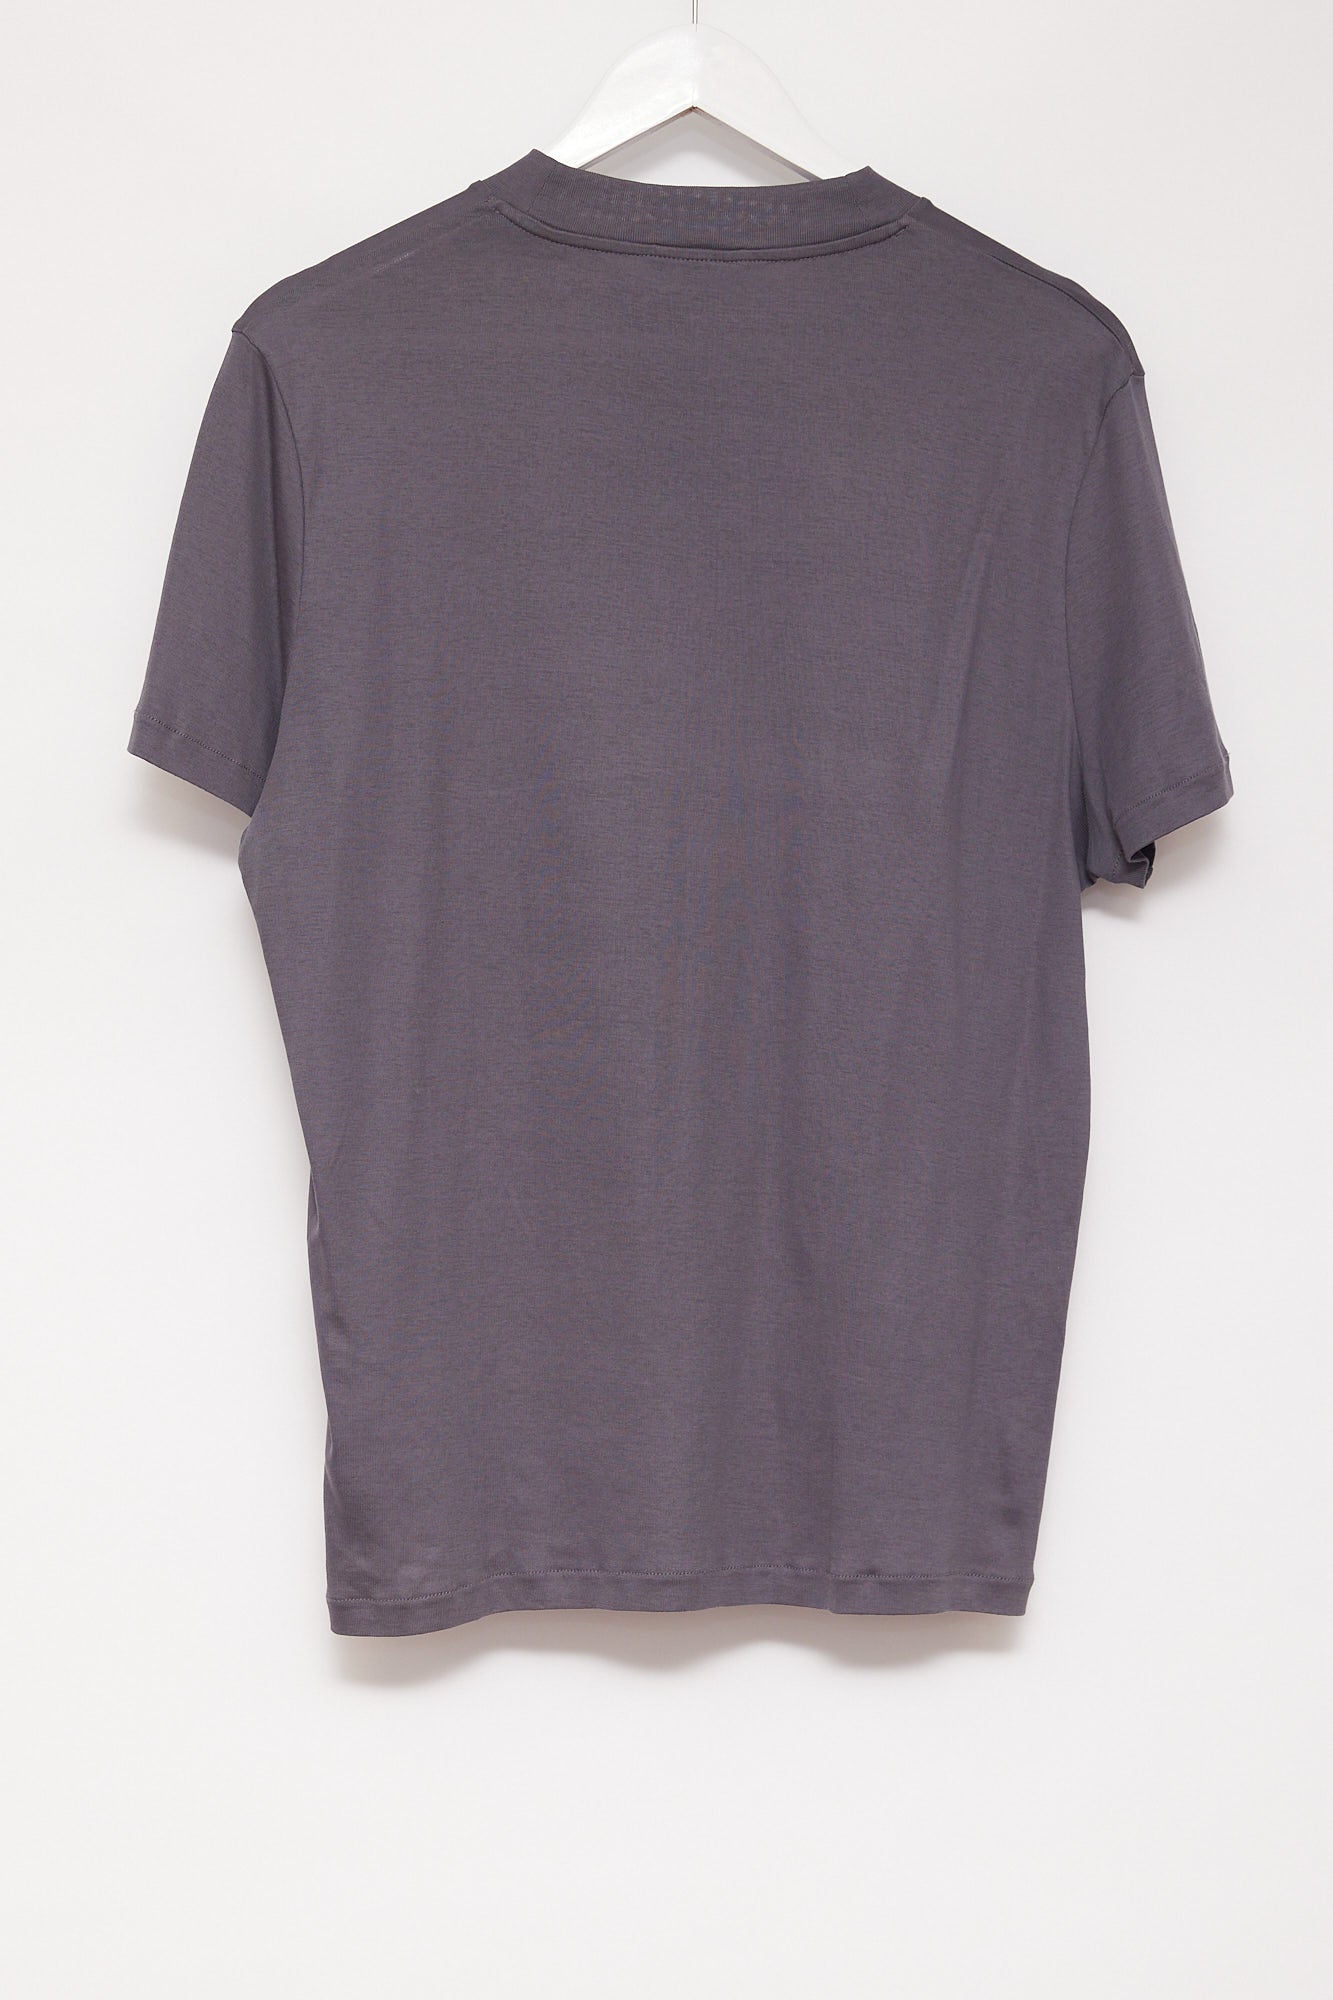 Mens Cos Relaxed Fit Grey T-shirt size Medium